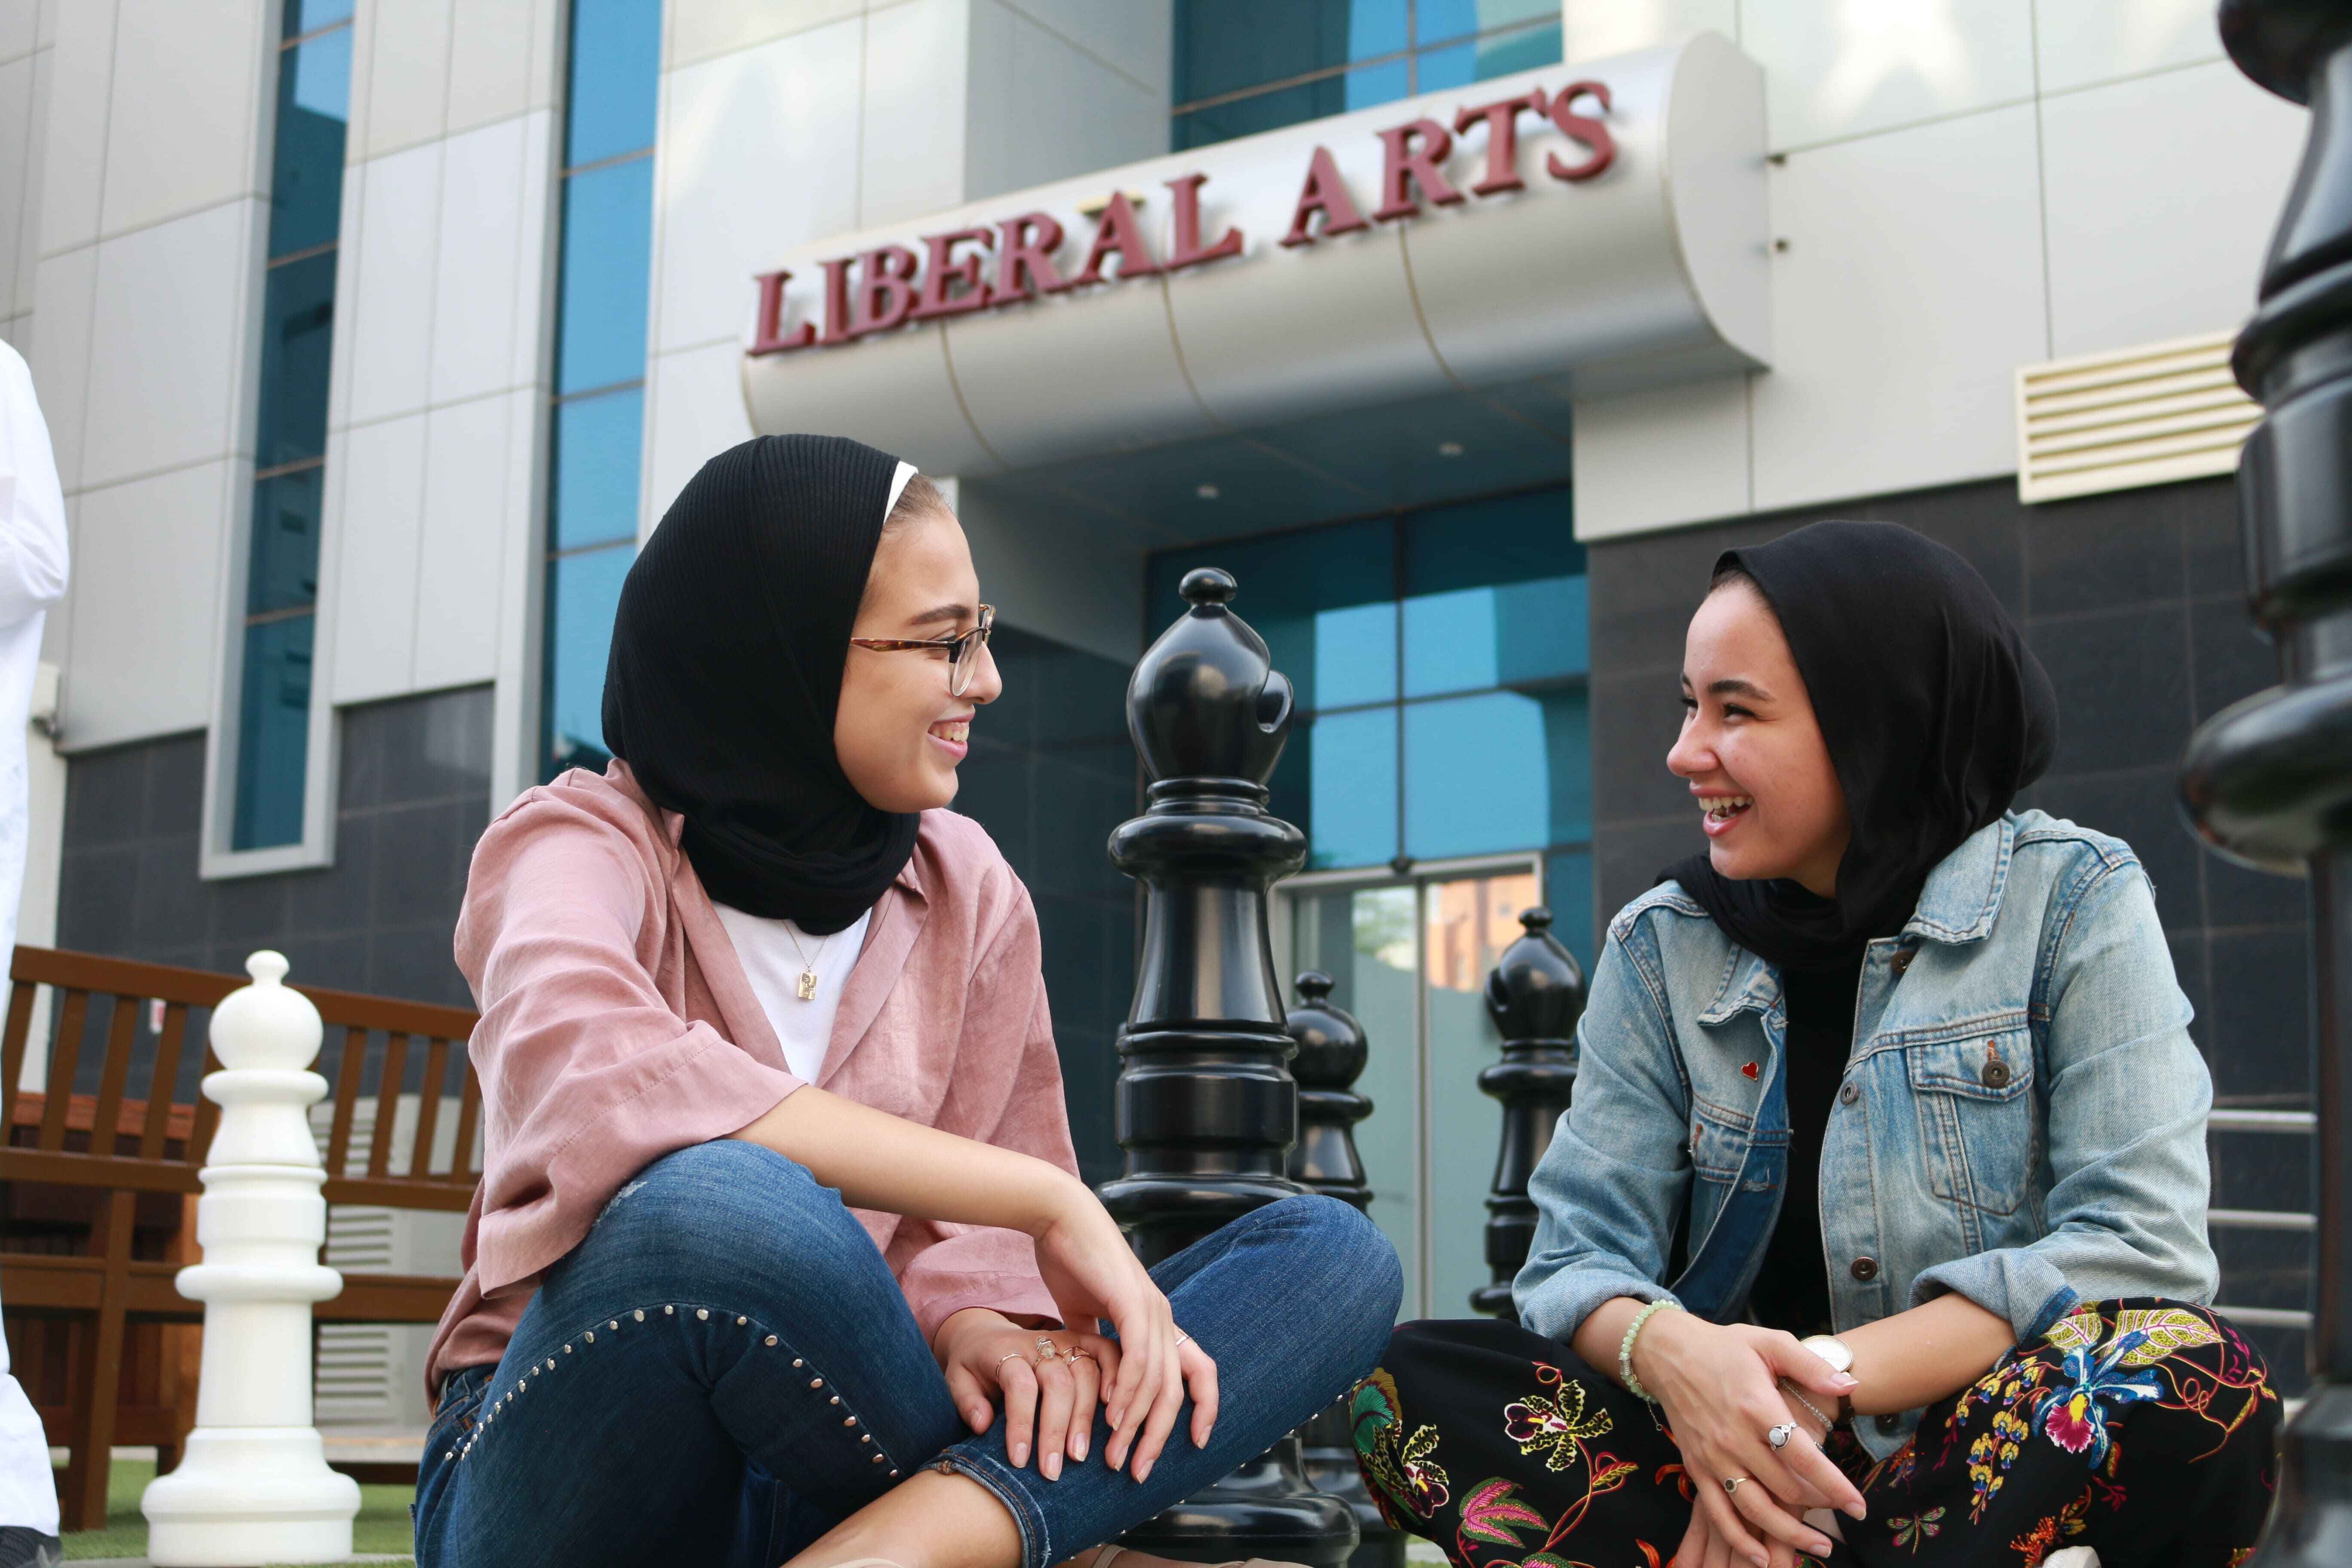 The Dartmouth-AUK collaboration reflects both institutions’ commitment to advancing liberal arts education.